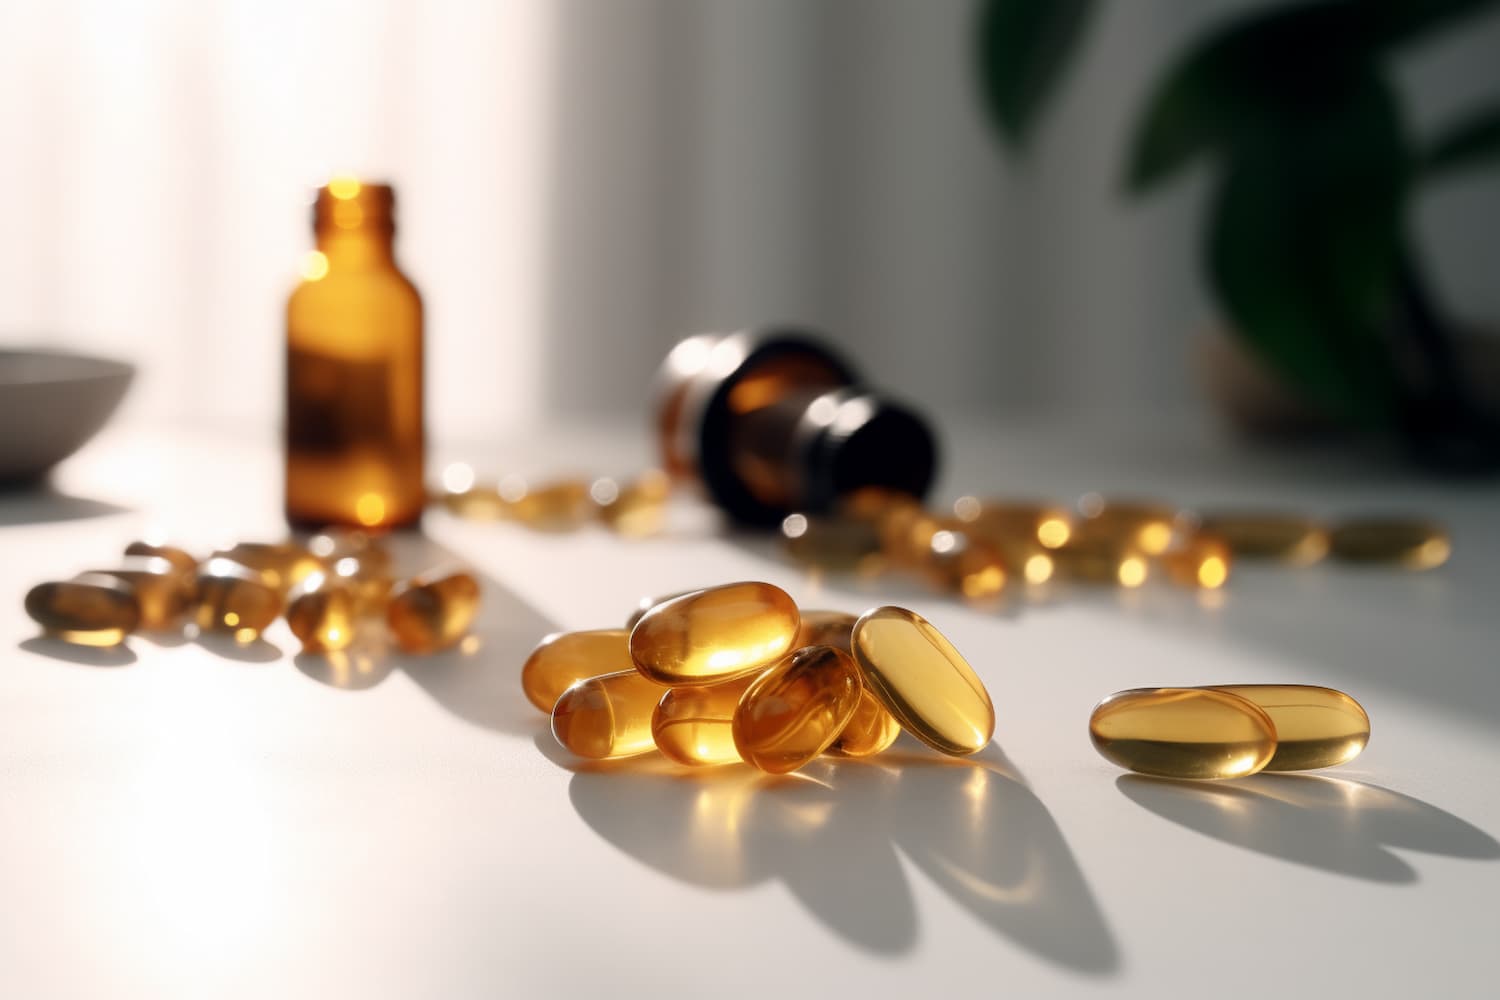 Top 10 best omega 3 supplements on the market in capsule and liquid form